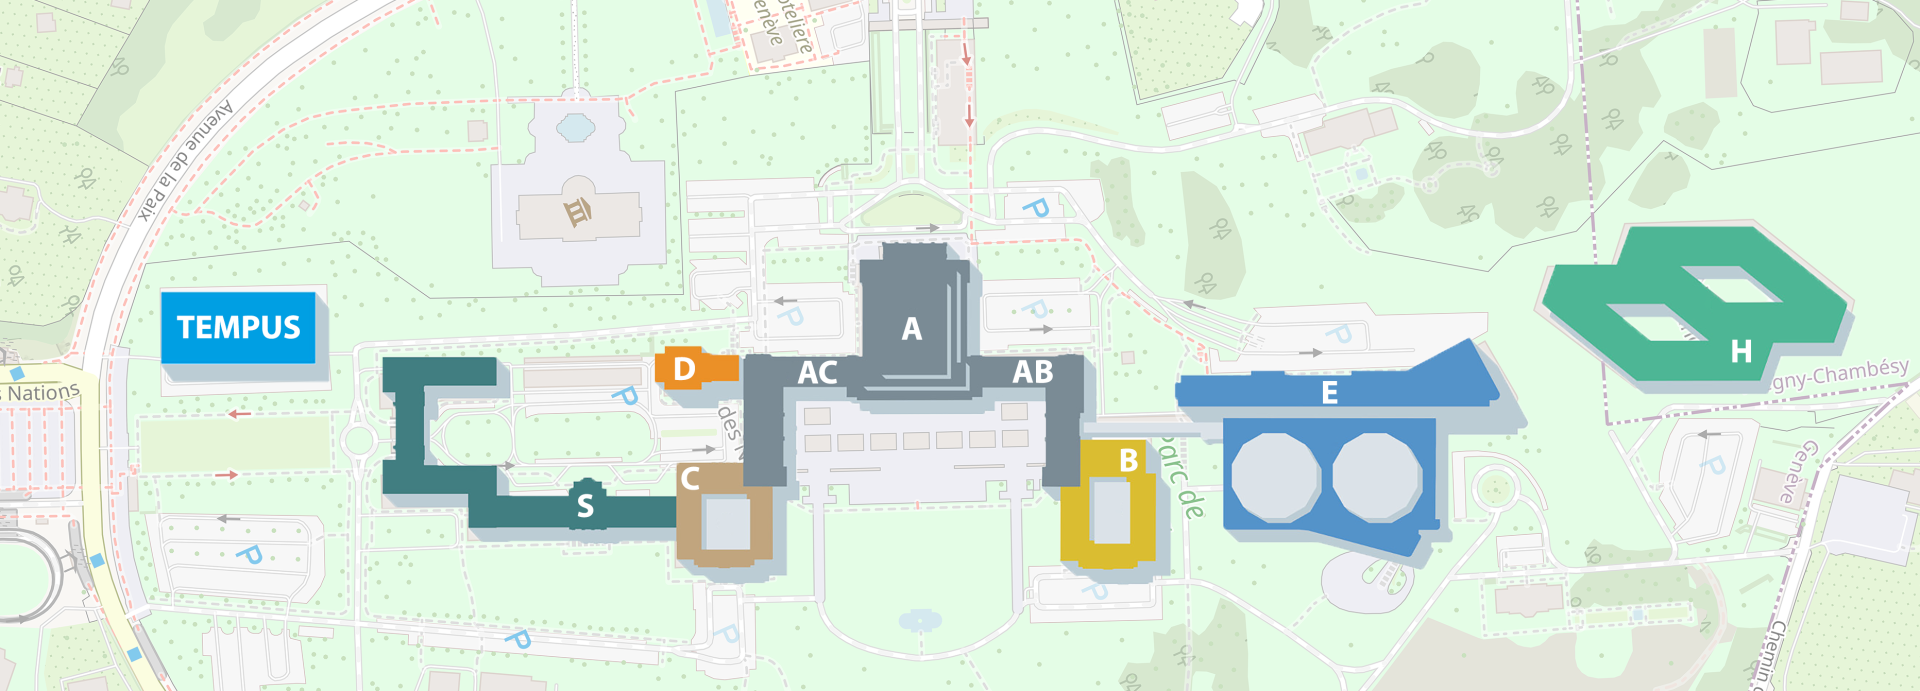 A map with the main buildings of the Palais des Nations marked